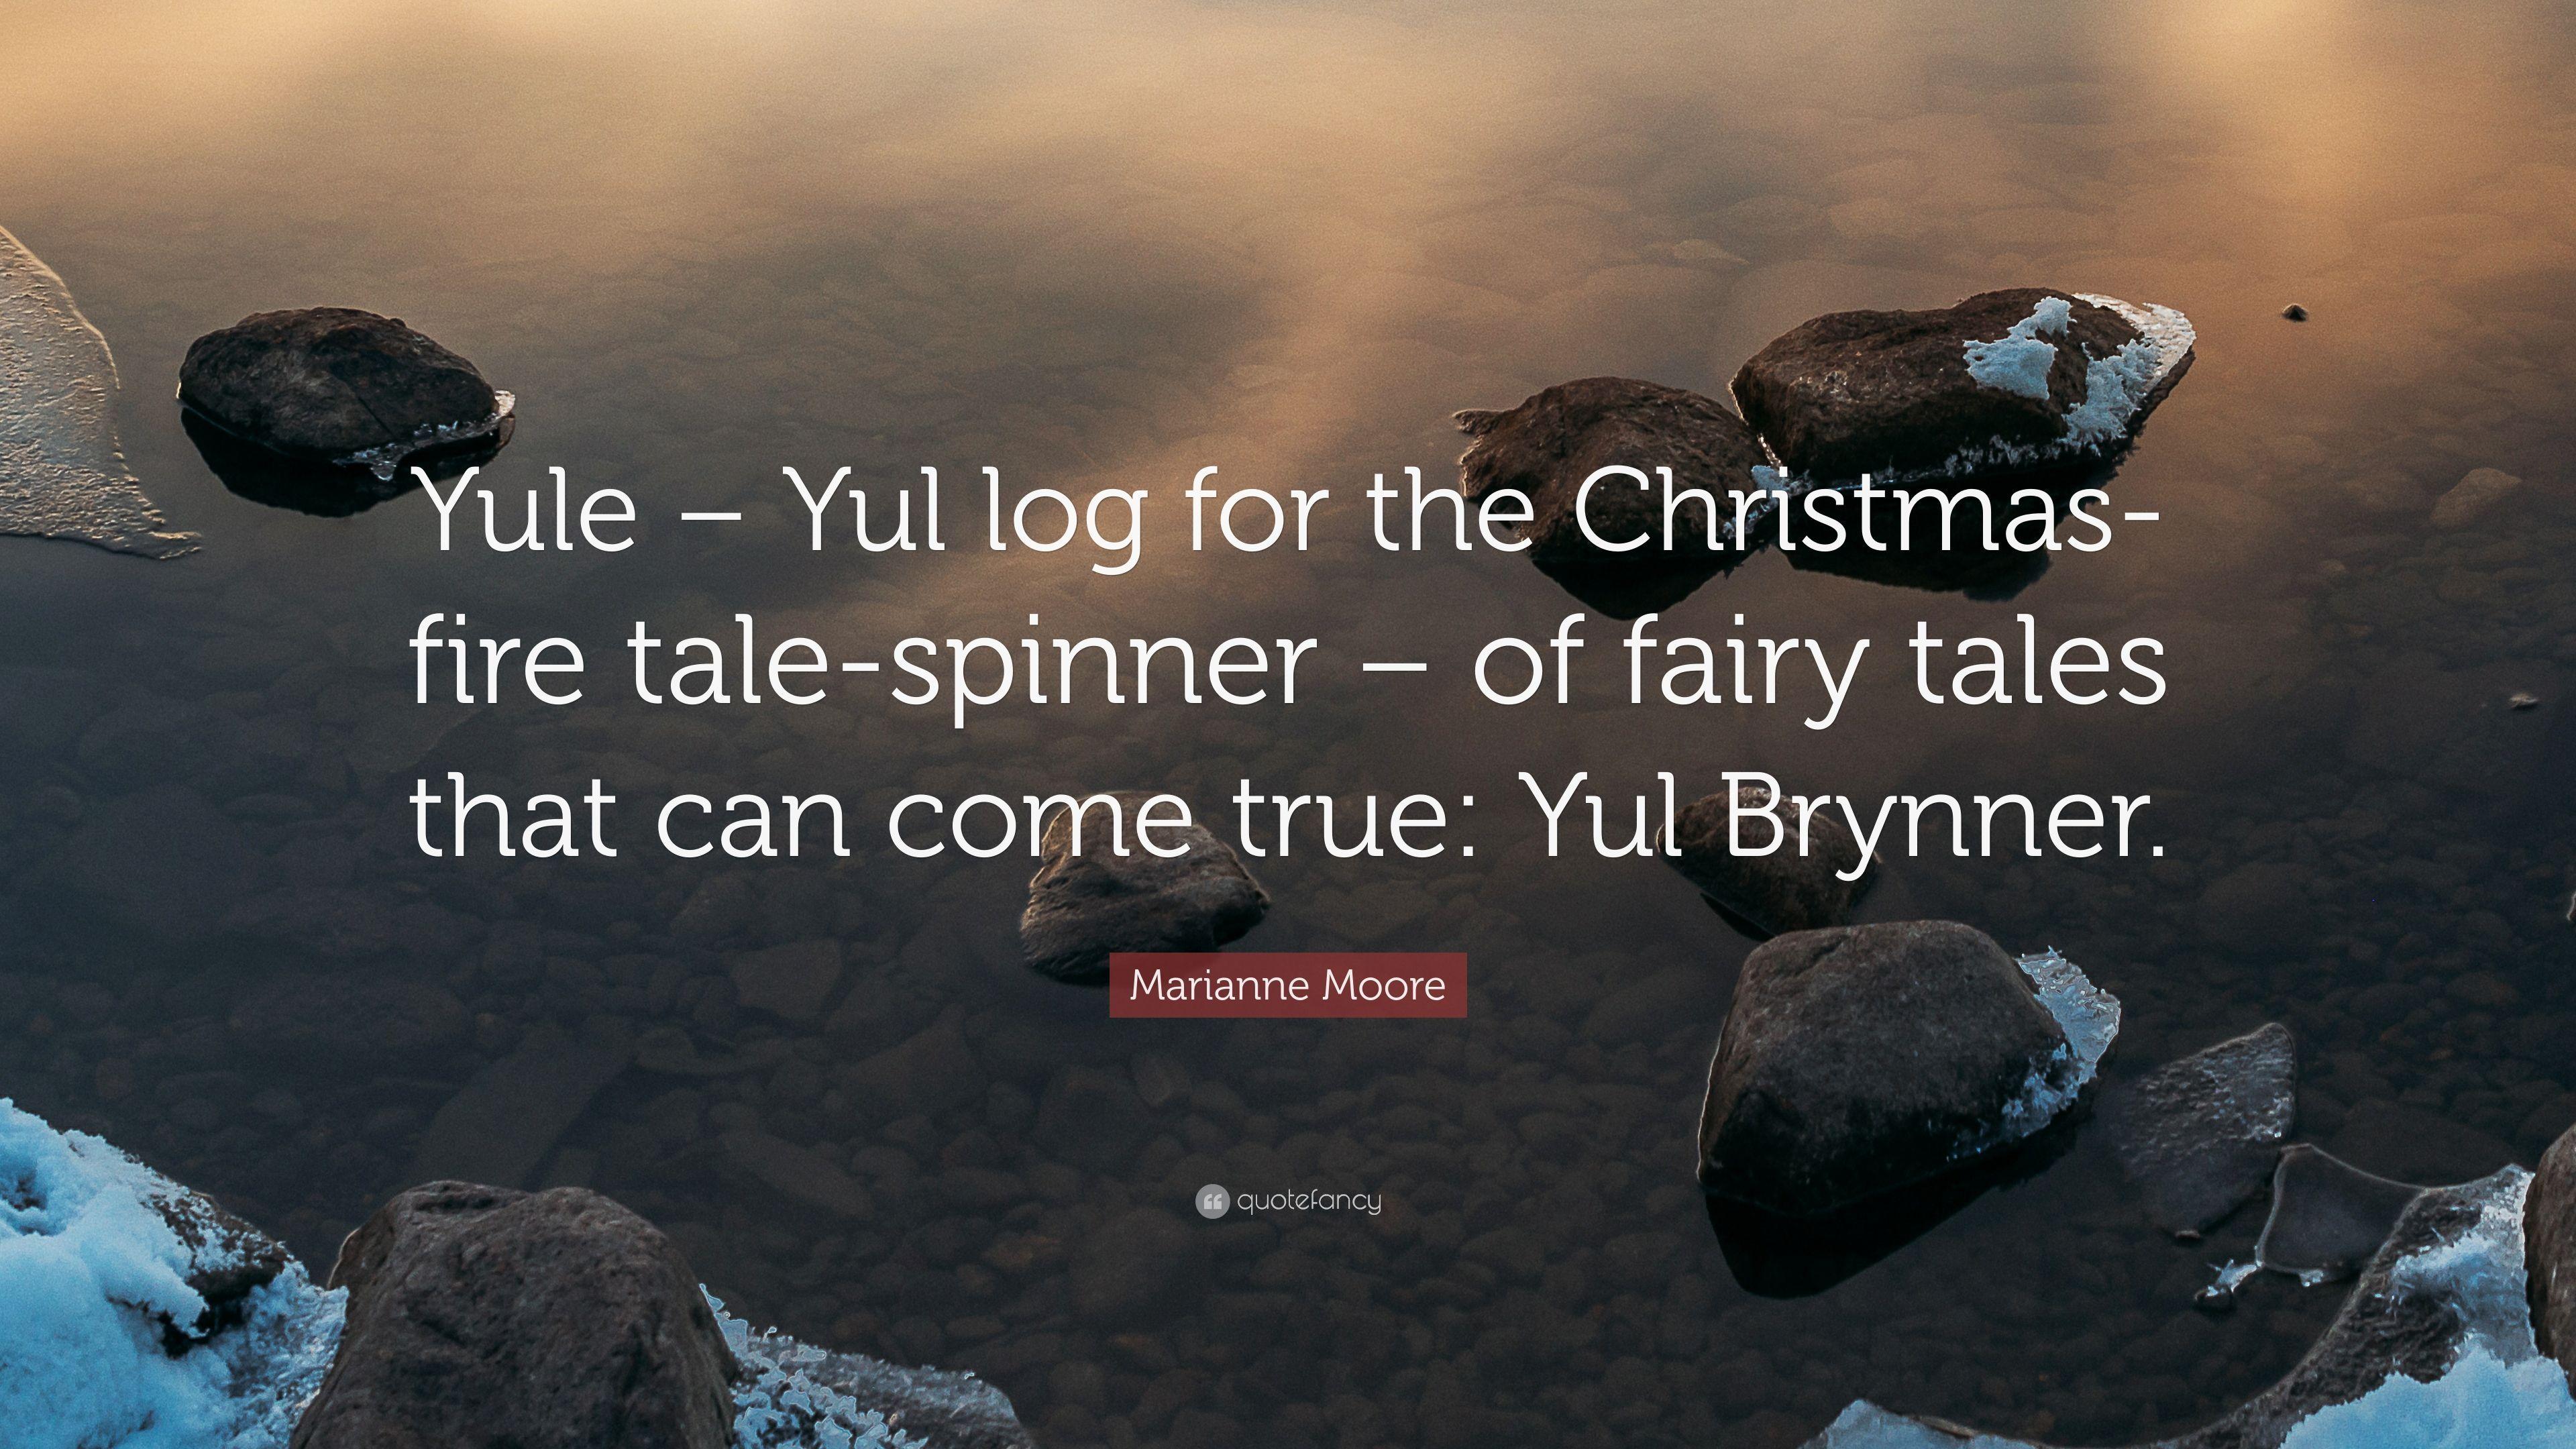 Marianne Moore Quote: “Yule